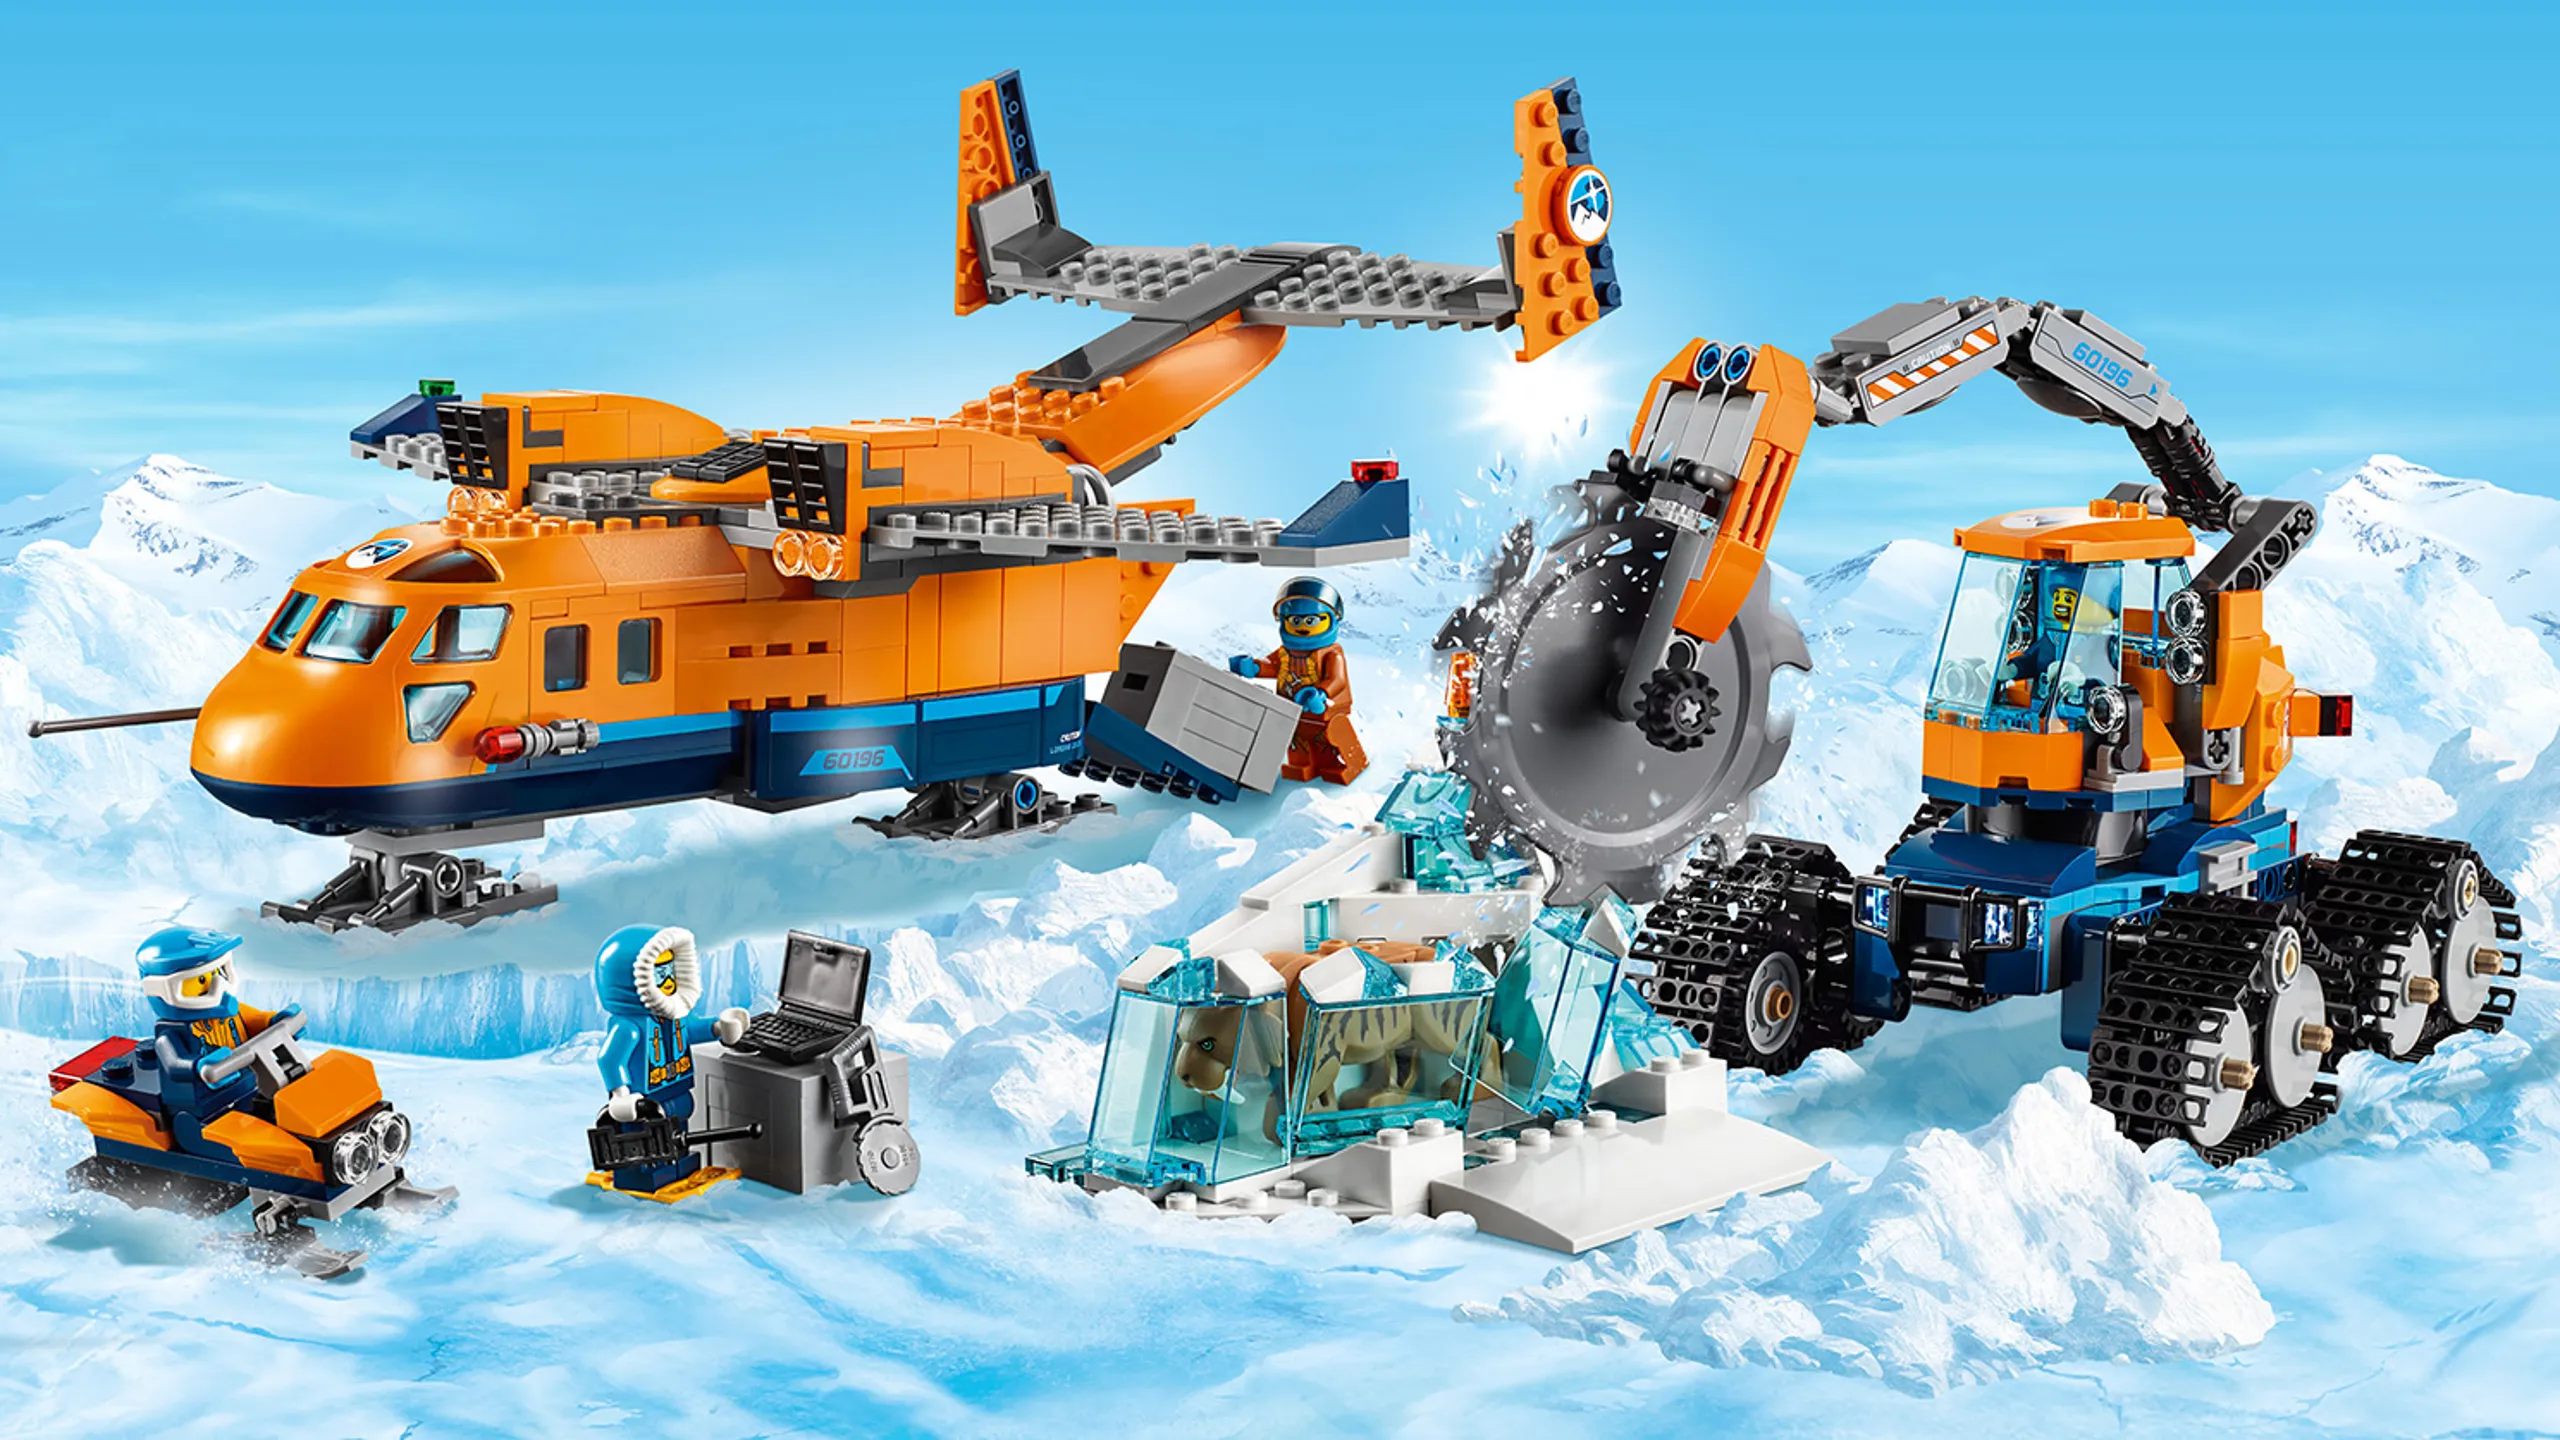 LEGO City Arctic Expedition - 60196 Arctic Supply Plane - Use the gigantic circular saw on an arctic vehicle to carve a saber tooth tiger out of the ice before loading it on to the plane.